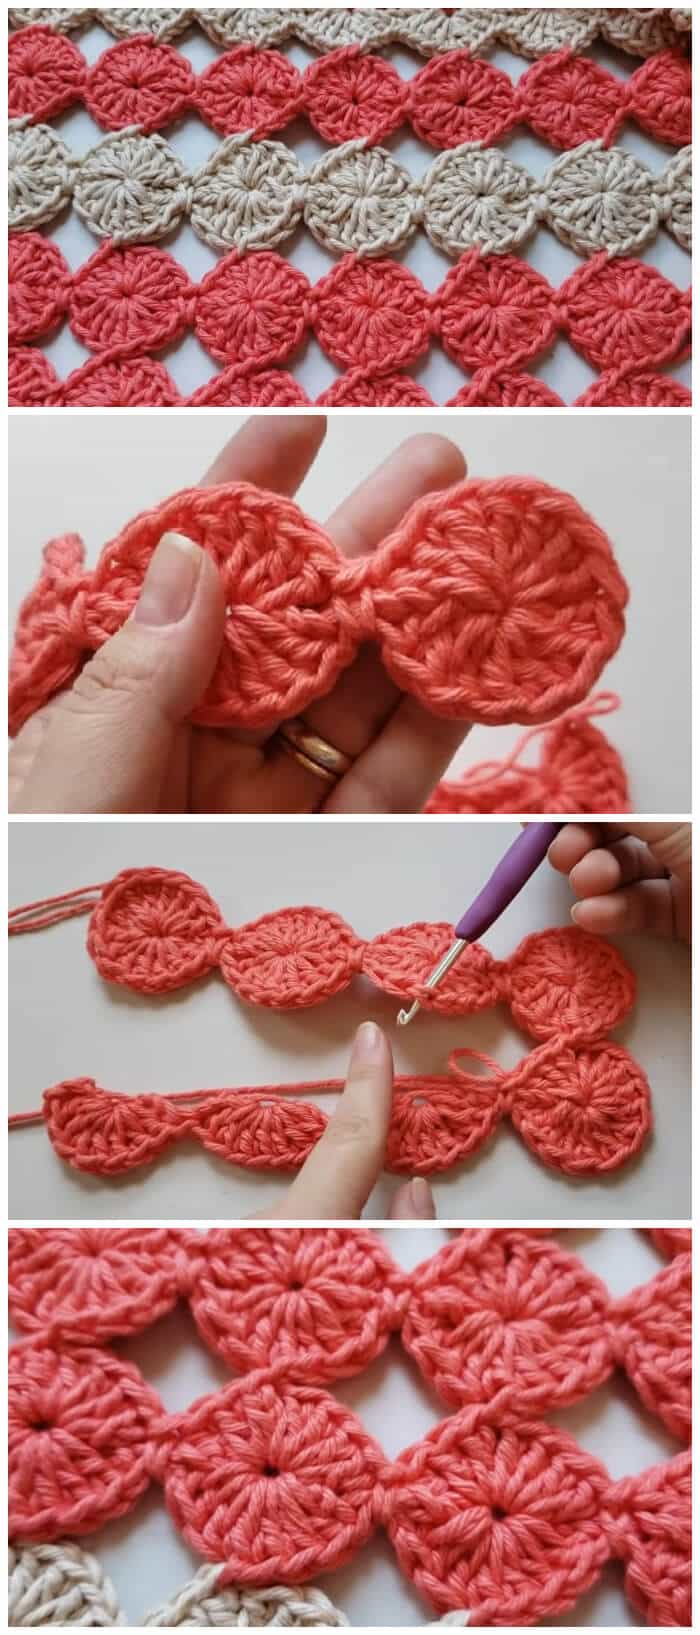 You can use any crochet stitch to make almost any project, but what is the very best crochet stitch for rugs? This stitch is not only for rug, you can make everything from this project, It's very easy and fast.